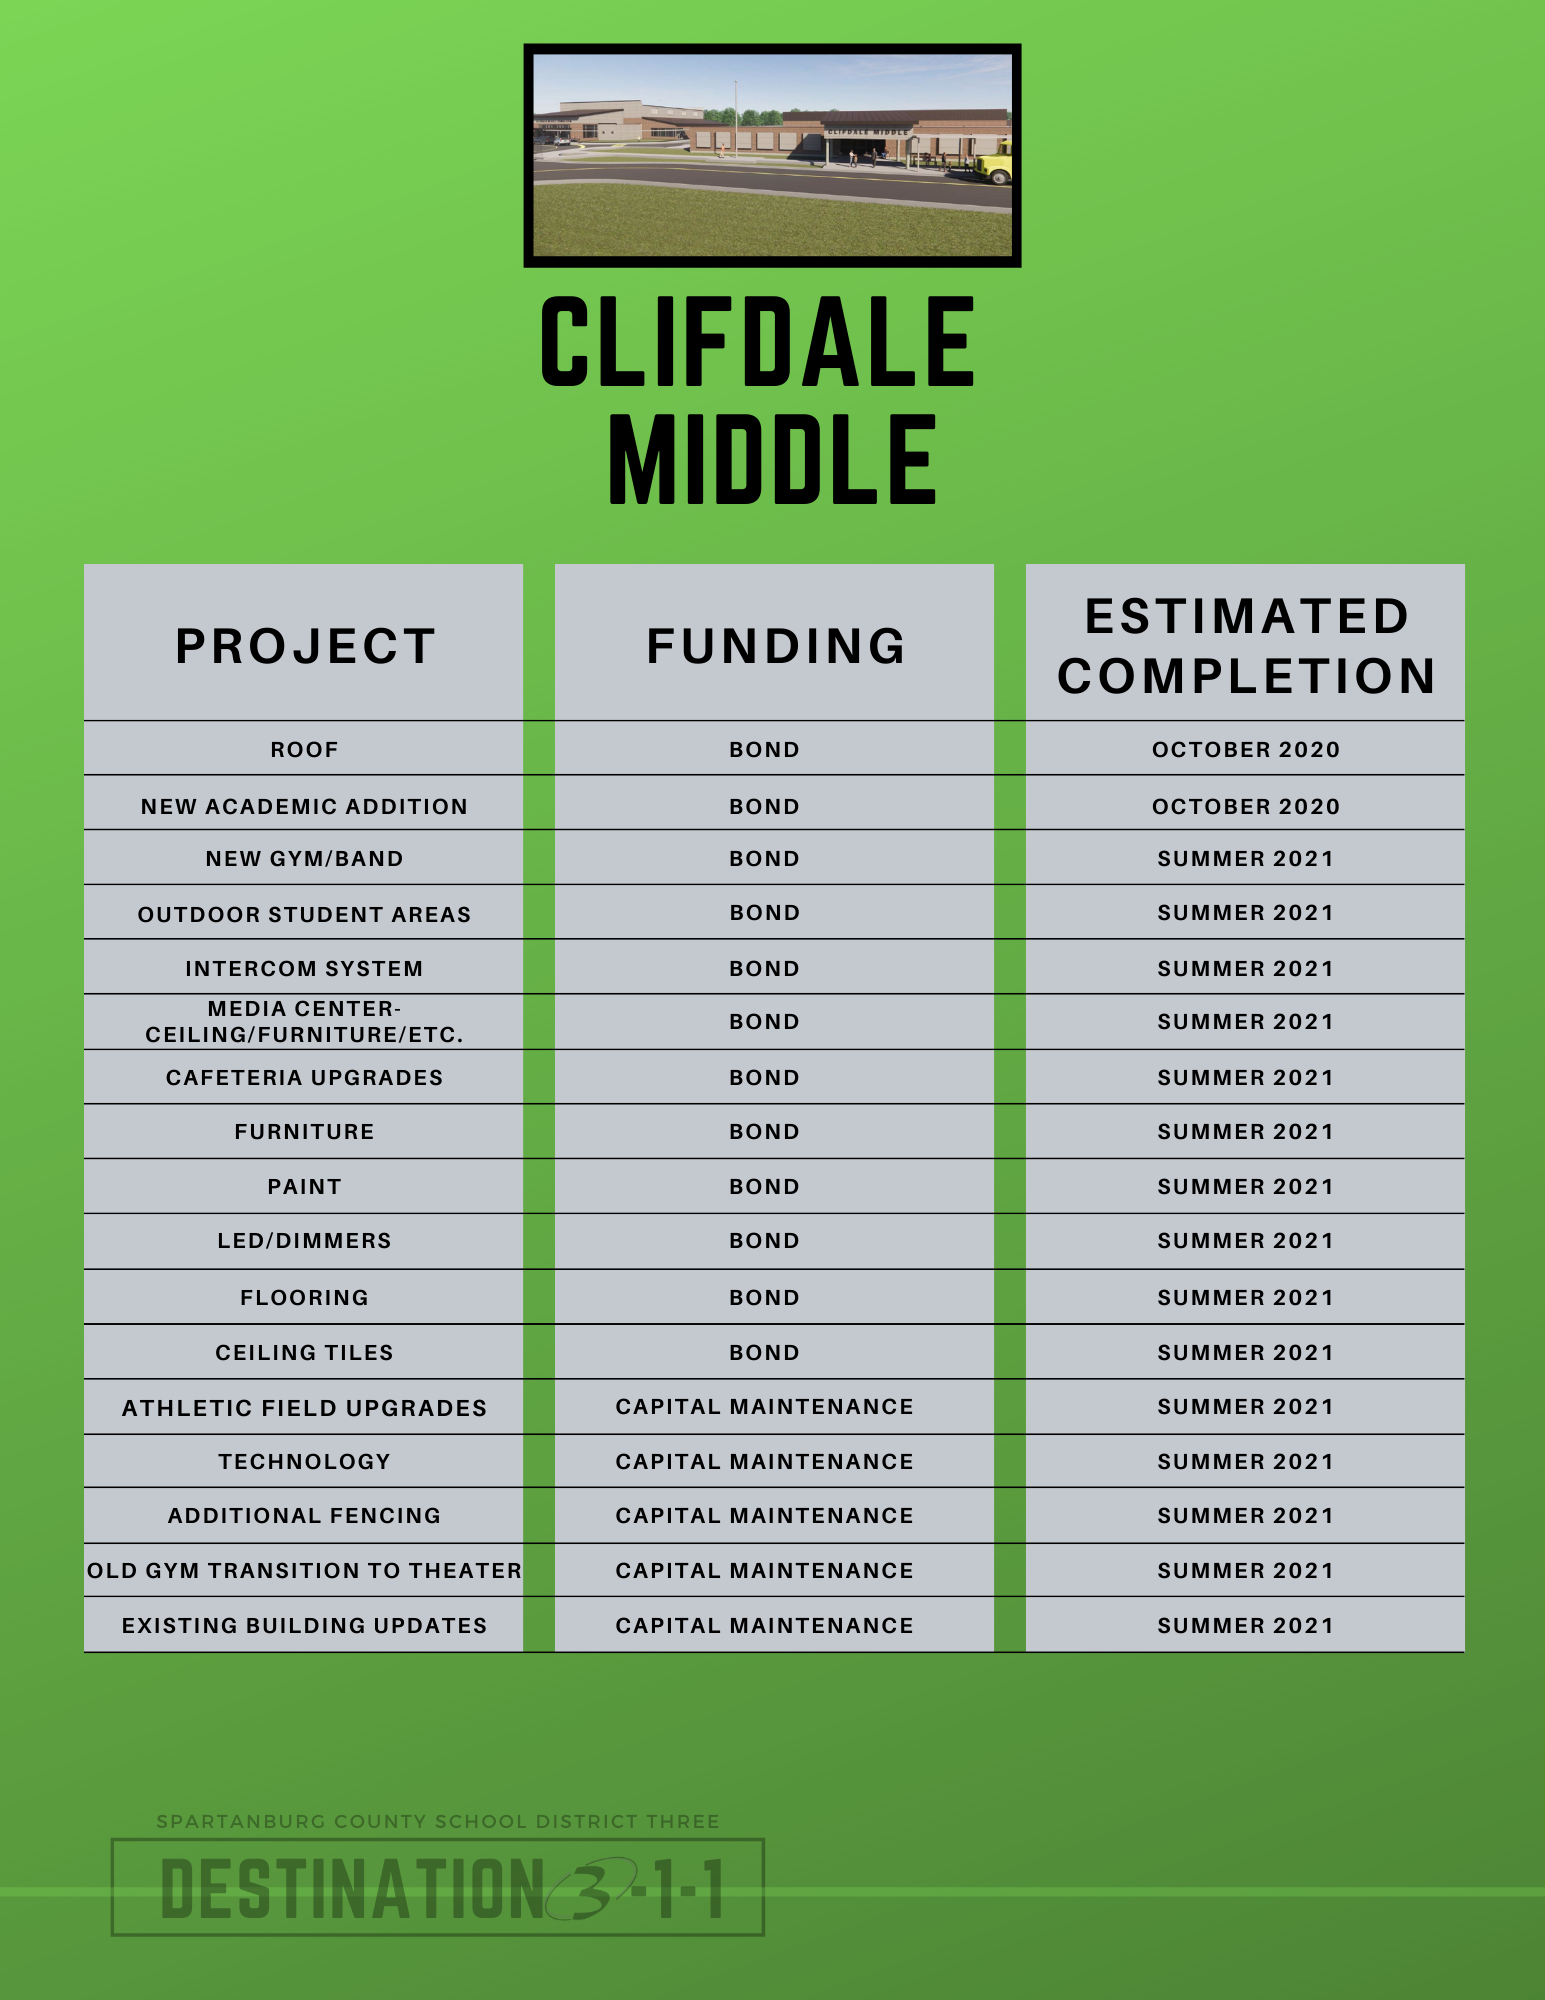 Cliffdale middle information about projects and funding sources